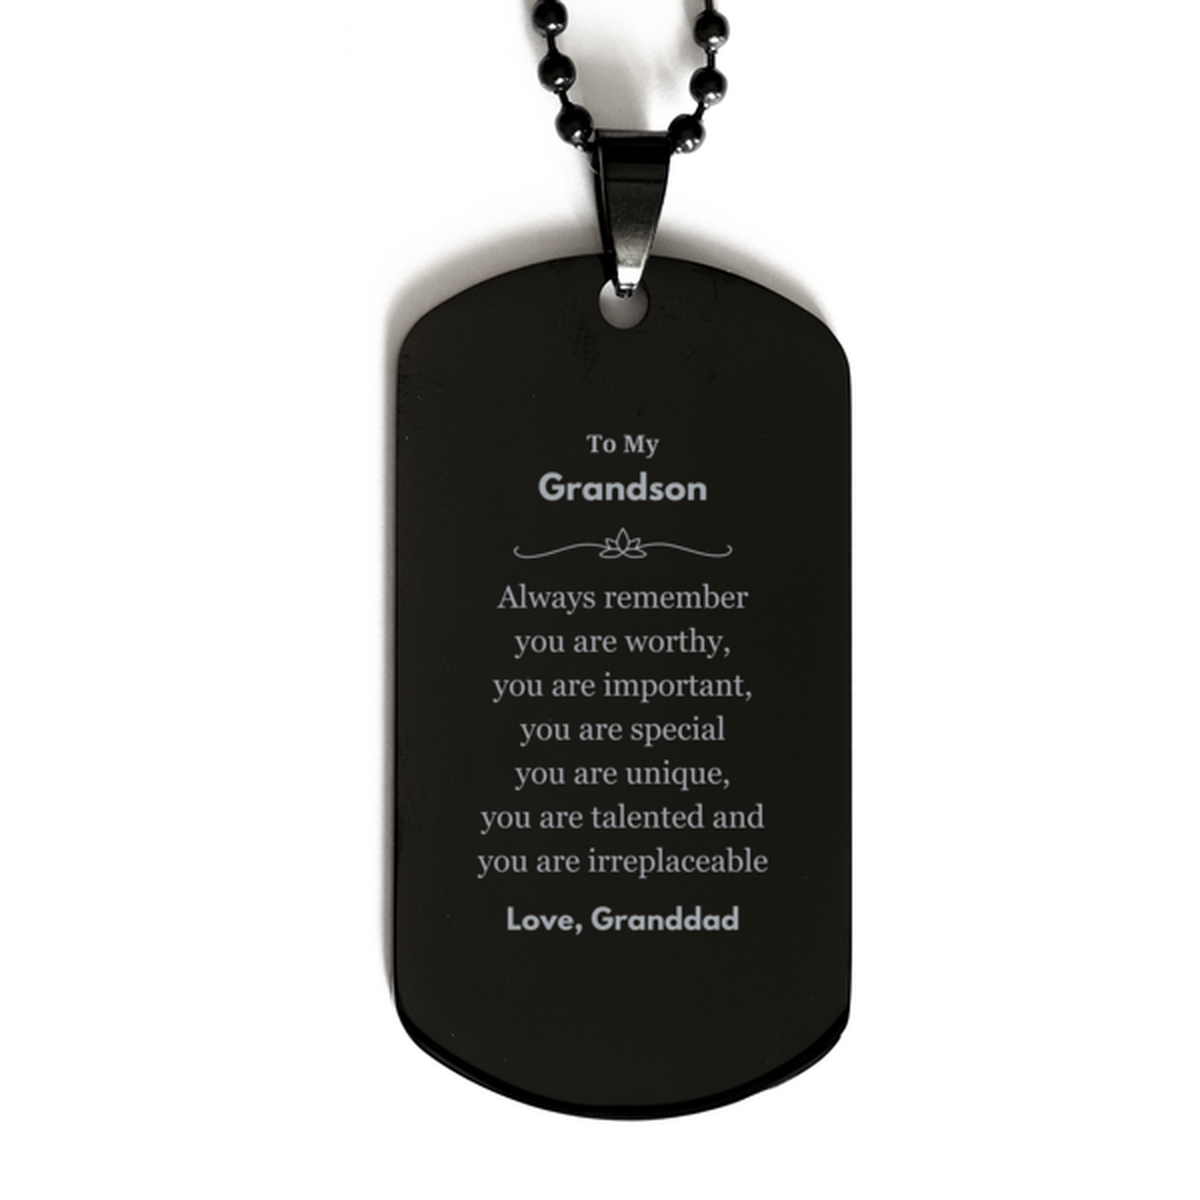 Grandson Birthday Gifts from Granddad, Inspirational Black Dog Tag for Grandson Christmas Graduation Gifts for Grandson Always remember you are worthy, you are important. Love, Granddad